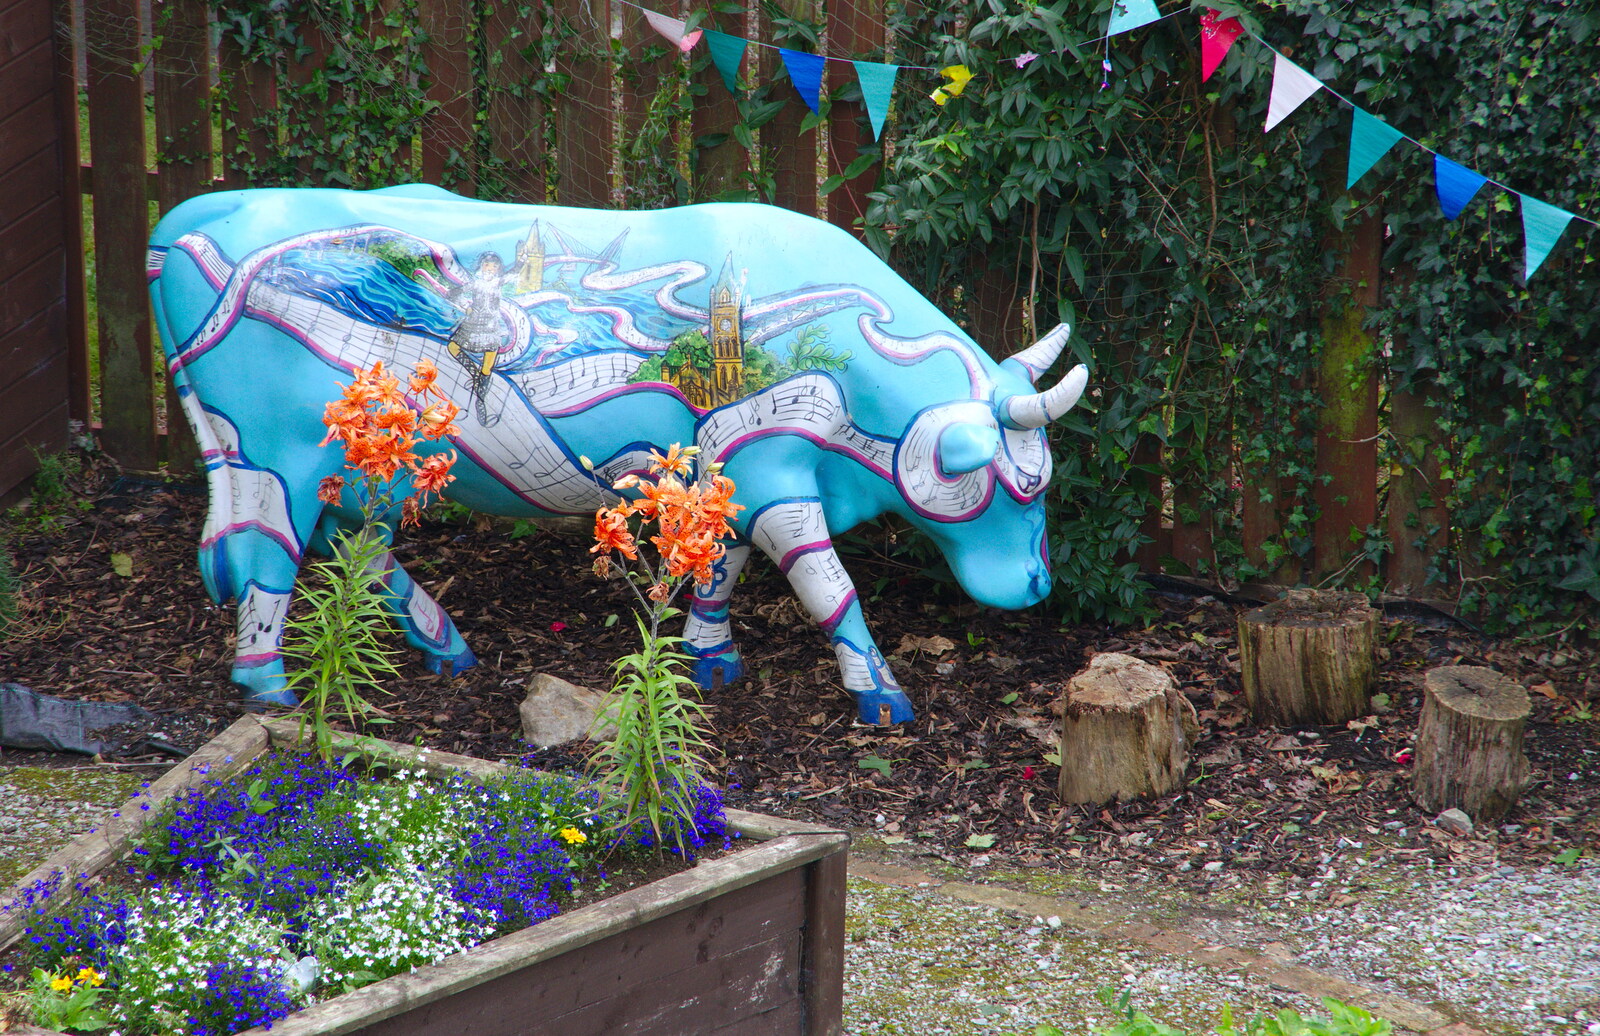 There's a nice musical painted bull in a garden from A Day in Derry, County Londonderry, Northern Ireland - 15th August 2019